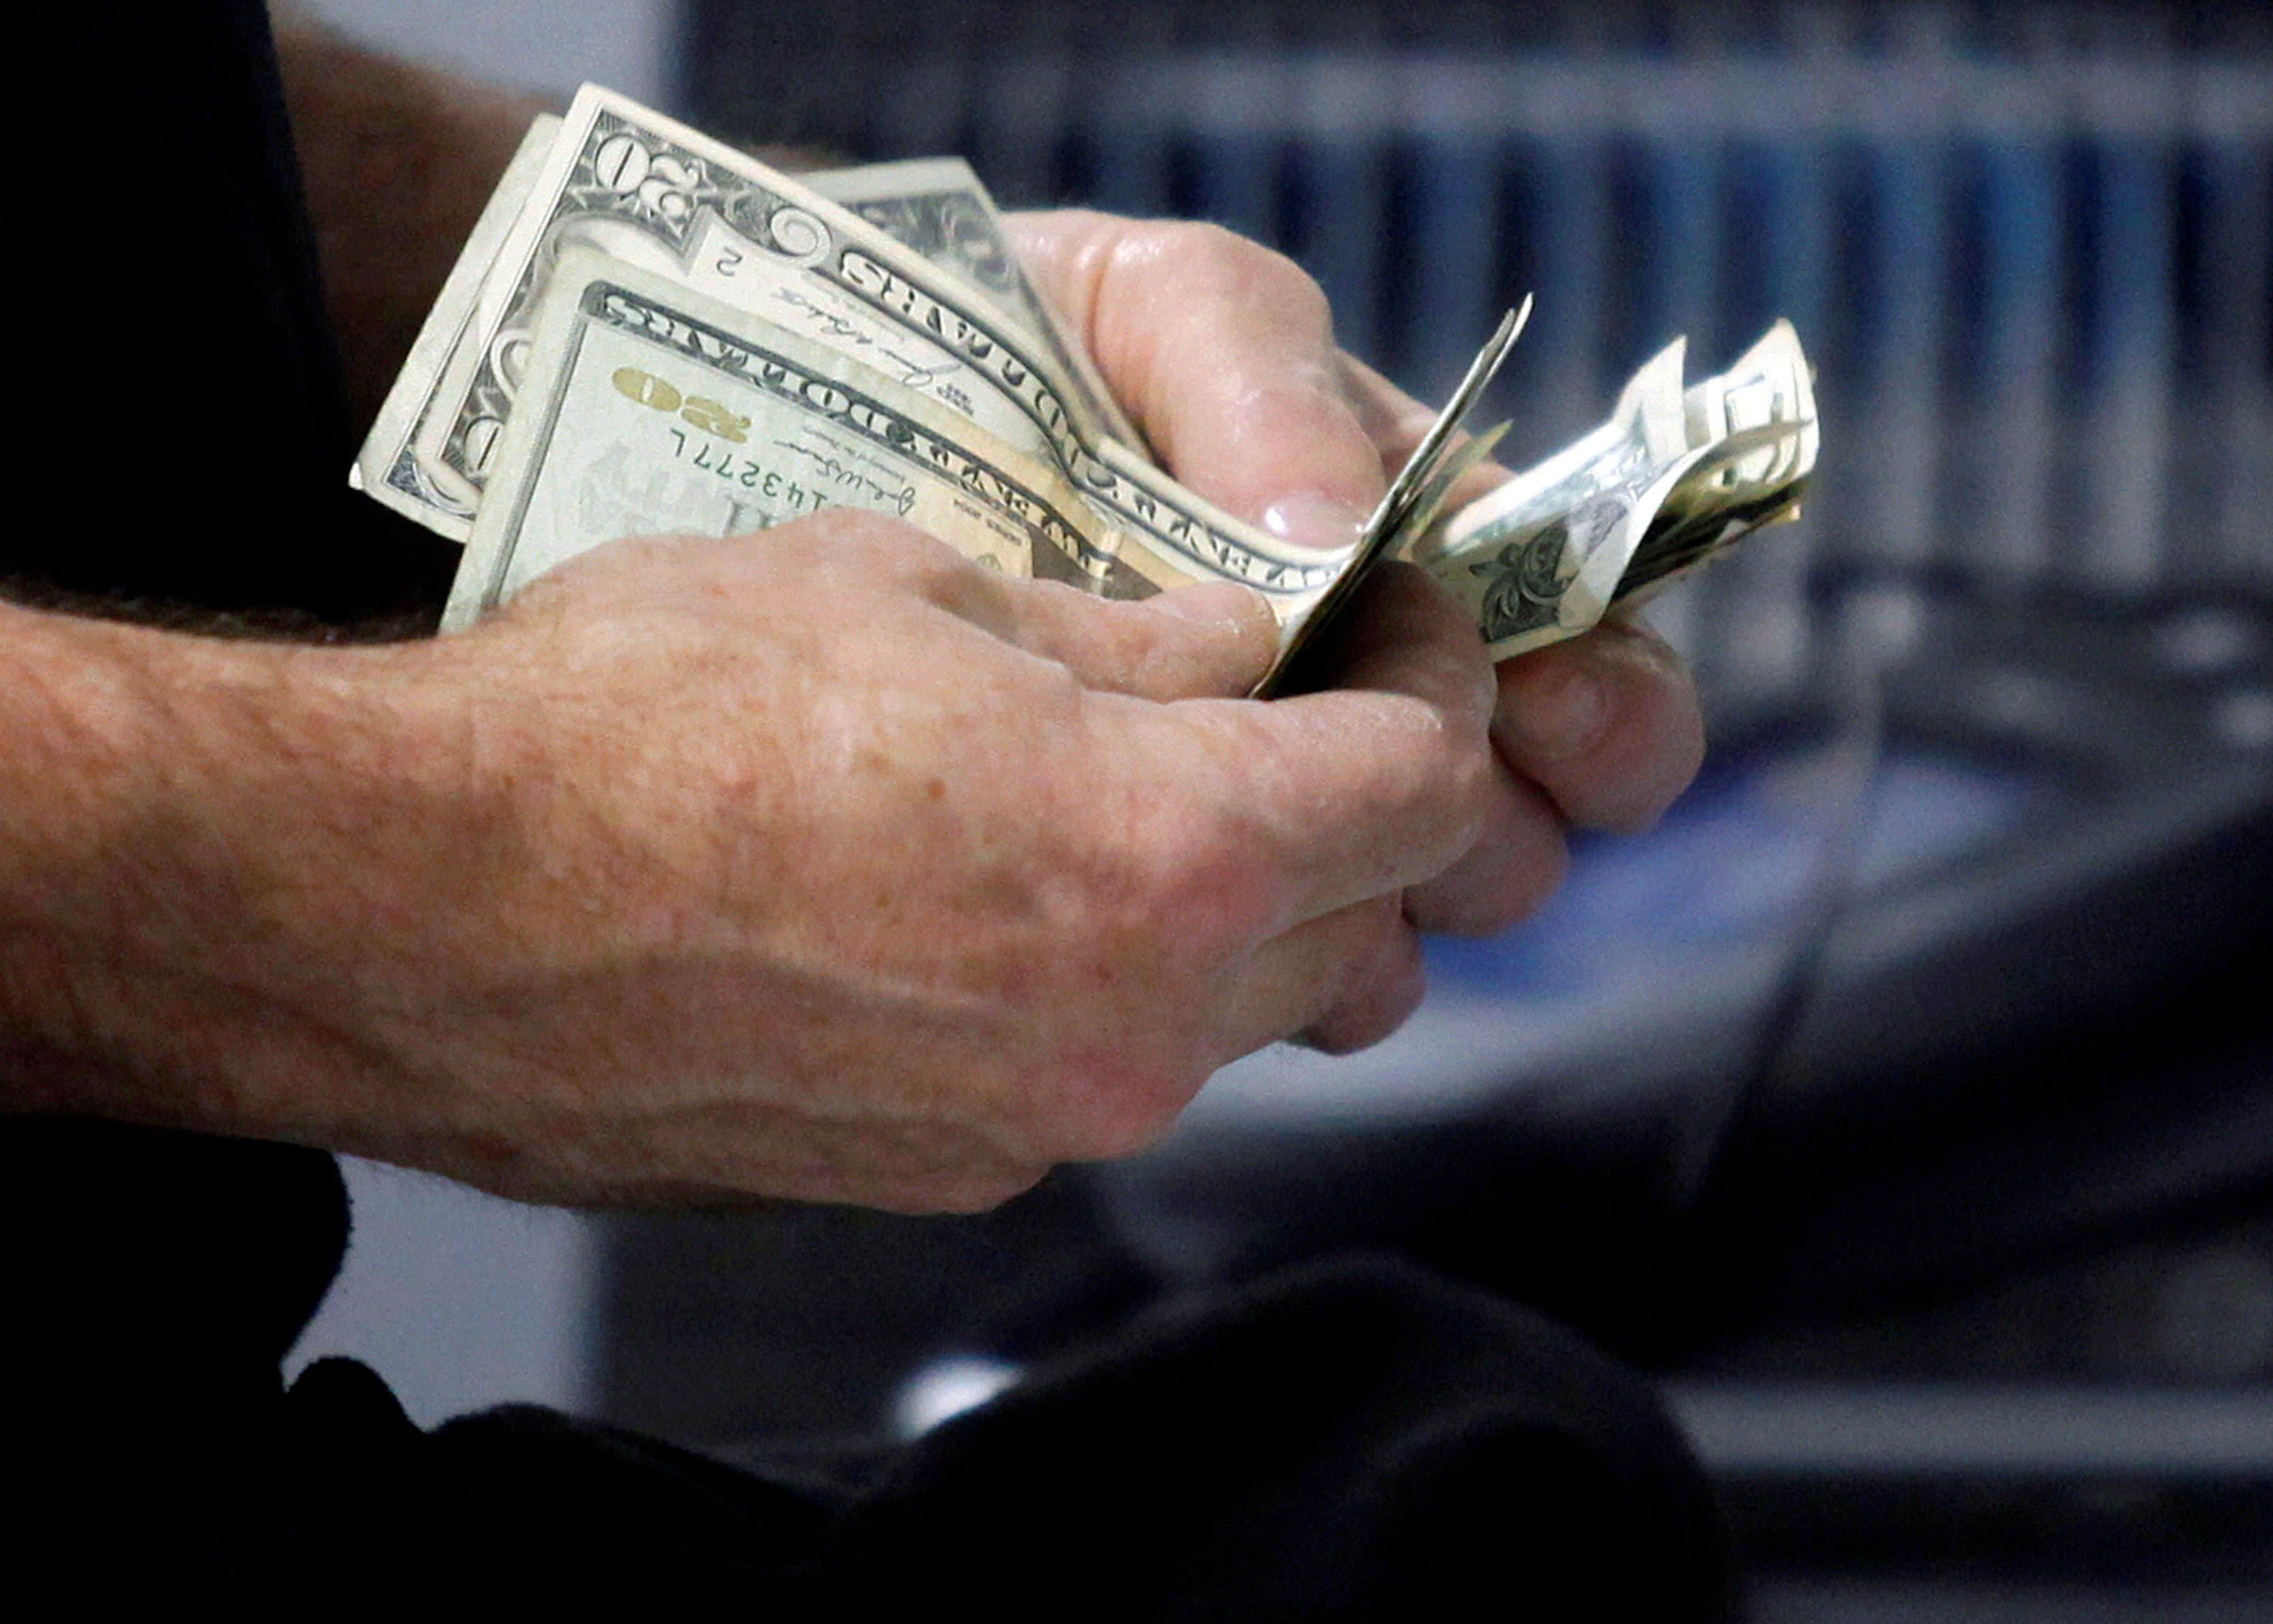 A customer counts his cash at the register while purchasing an item at a Best Buy store in Flushing, New York March 27, 2010.  REUTERS/Jessica Rinaldi